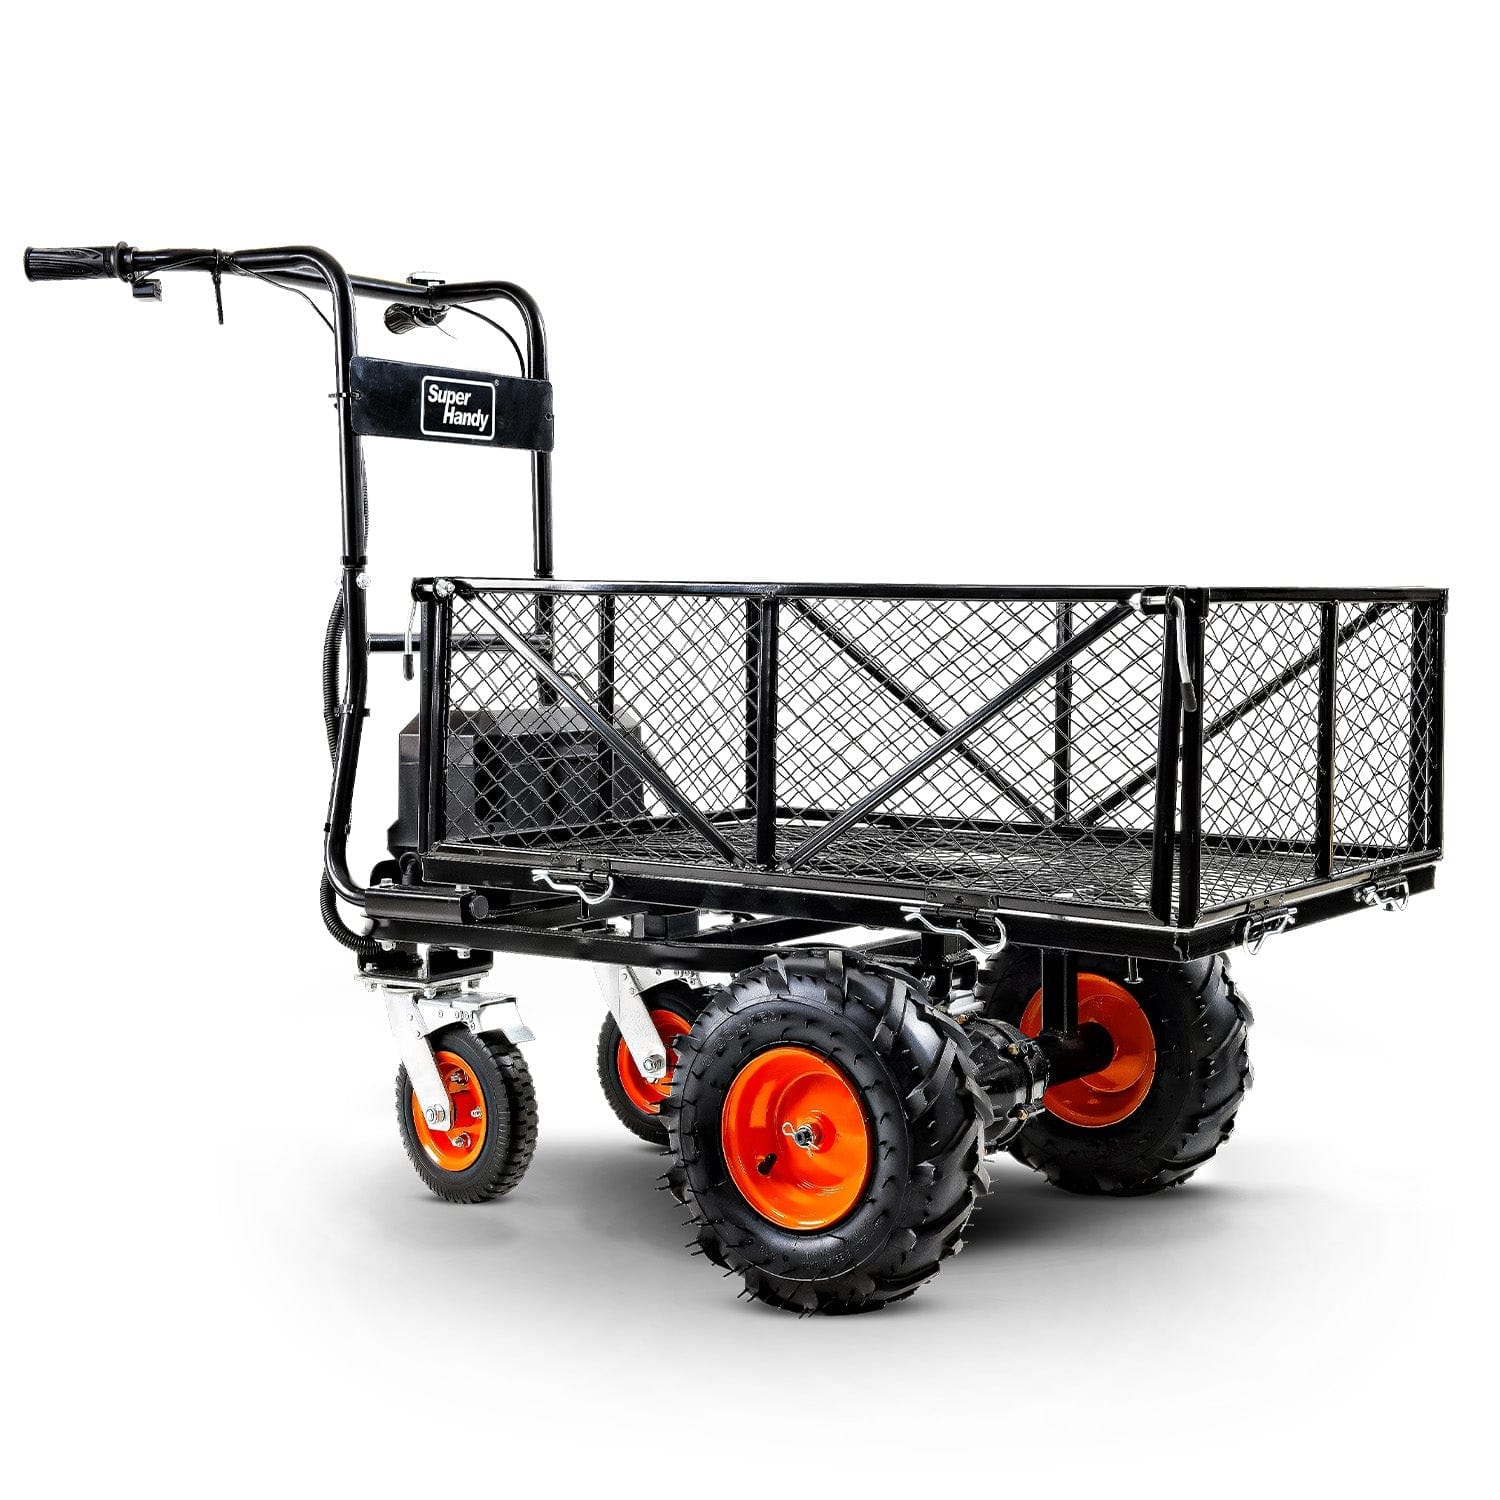 SuperHandy Electric Utility Wagon Pro - 48V 2Ah Battery, 660Lb Max Weight